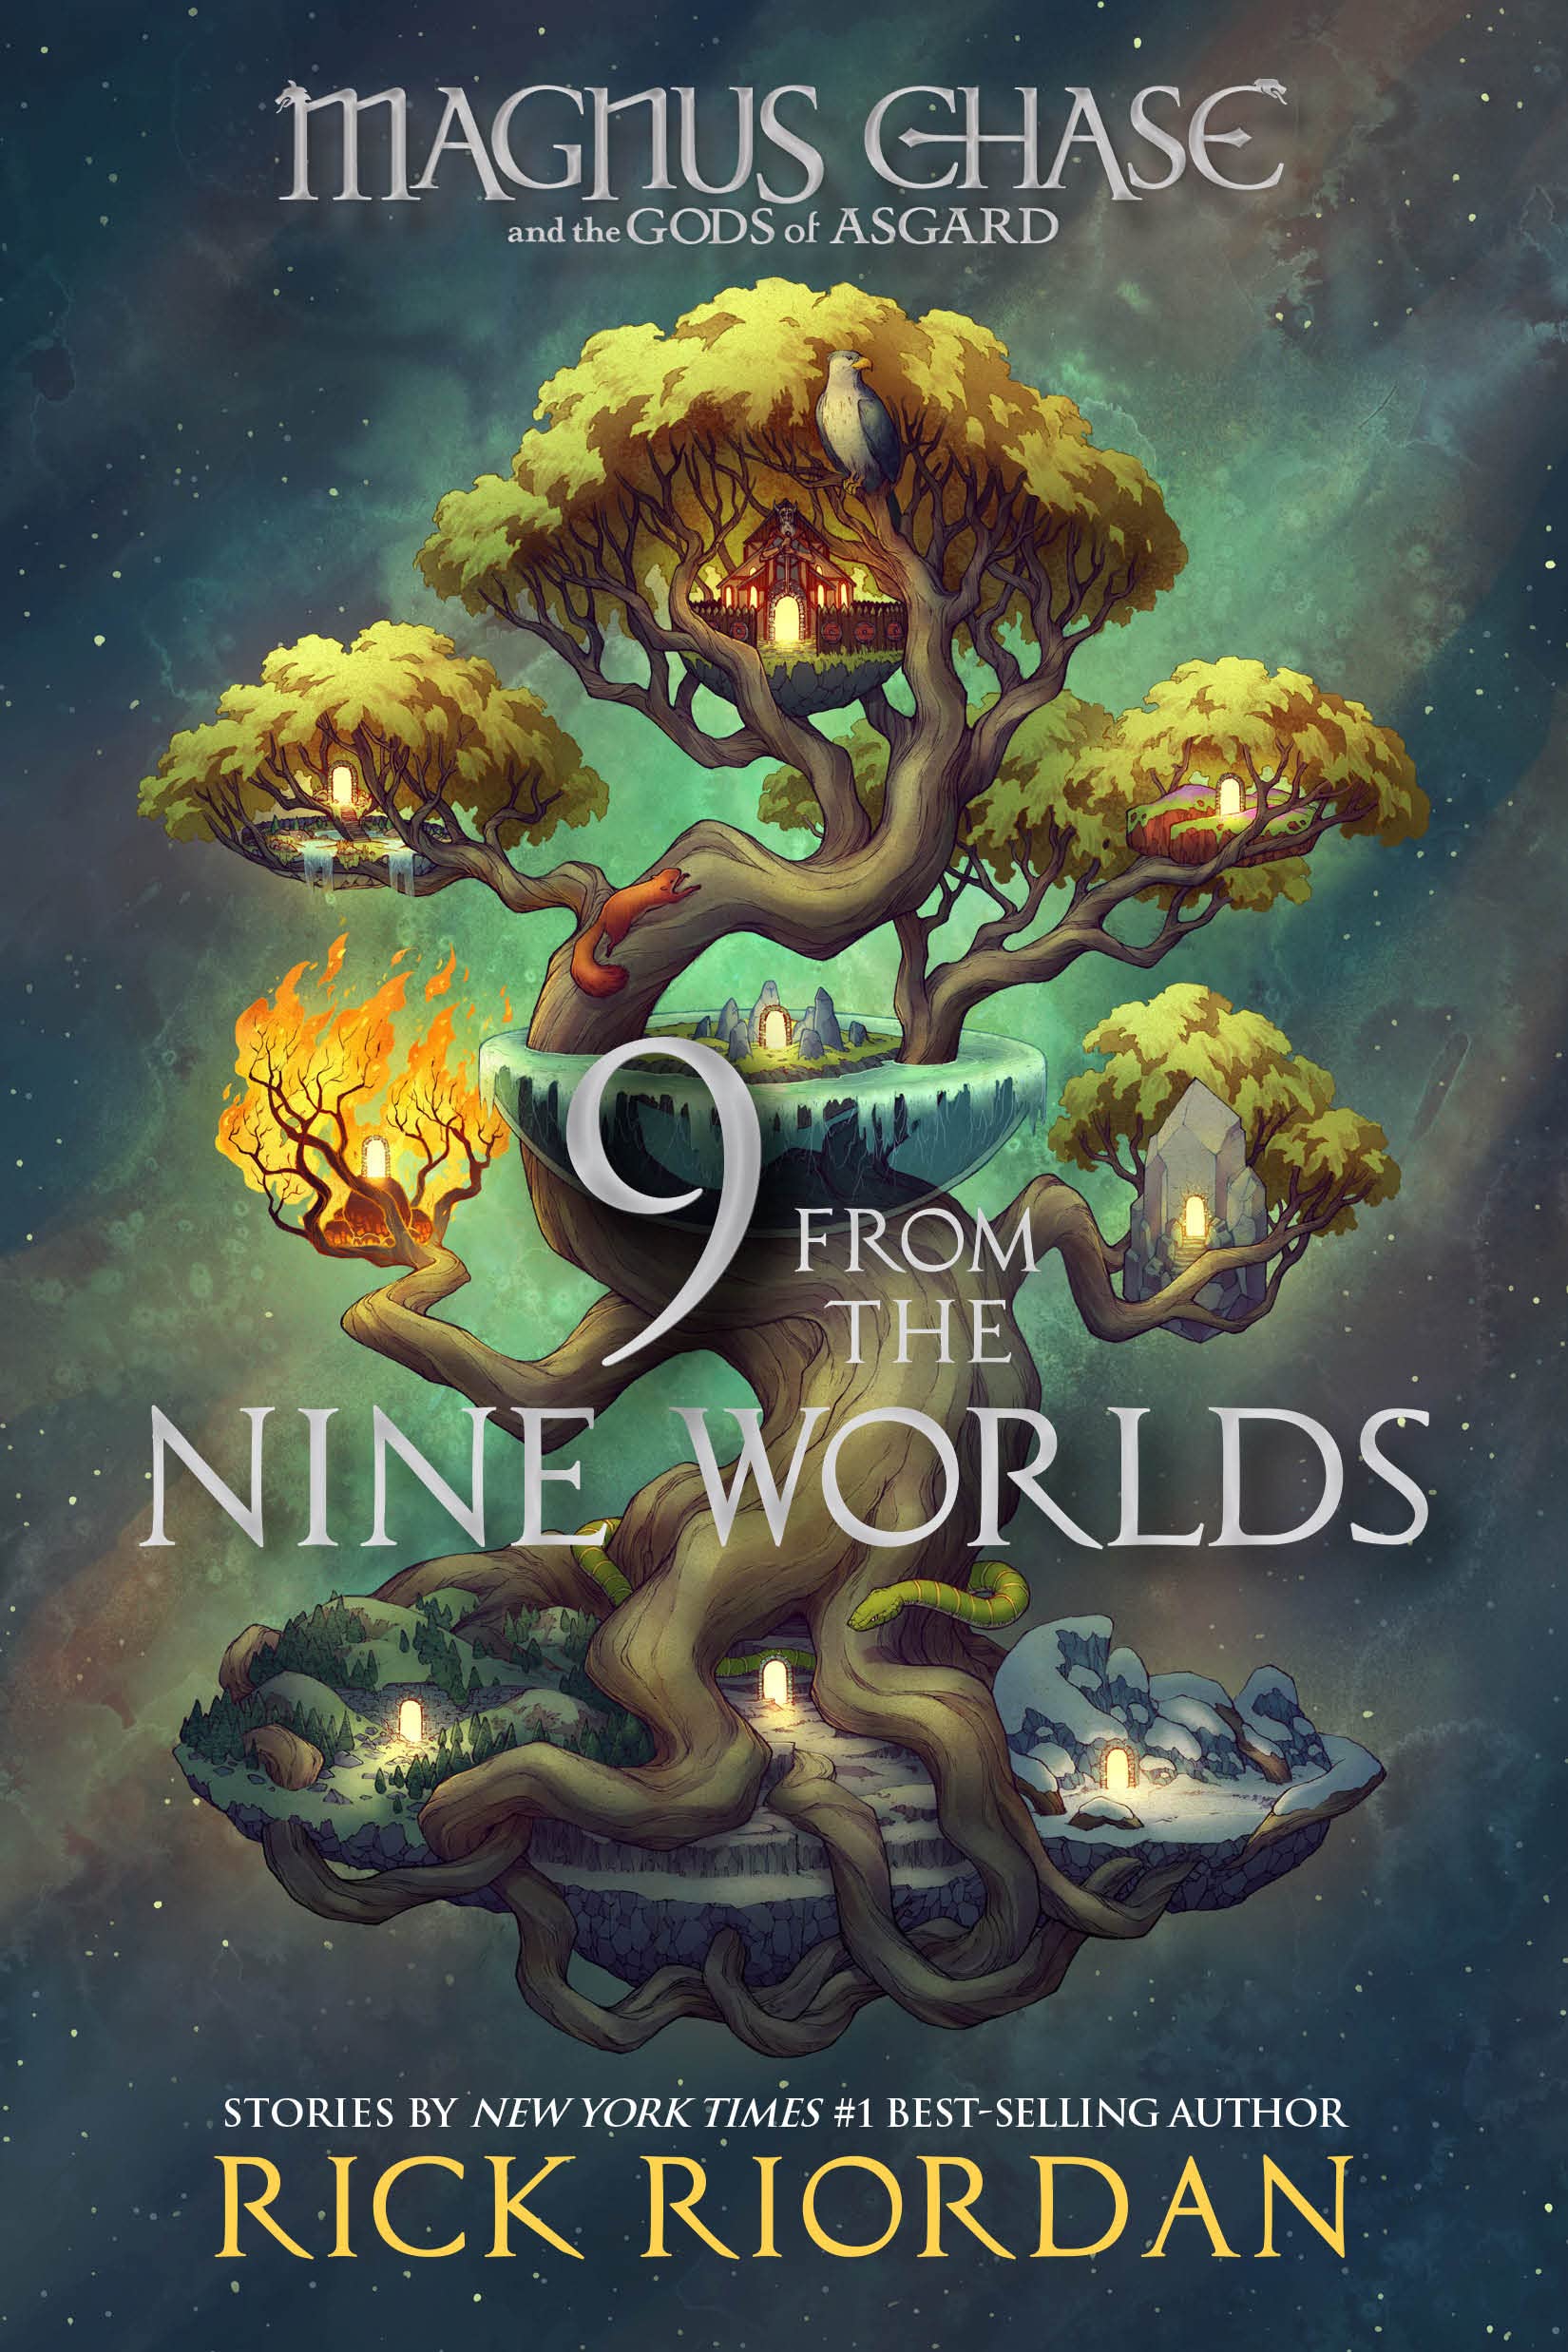 9 from the Nine Worlds (Magnus Chase and the Gods of Asgard Book 4)